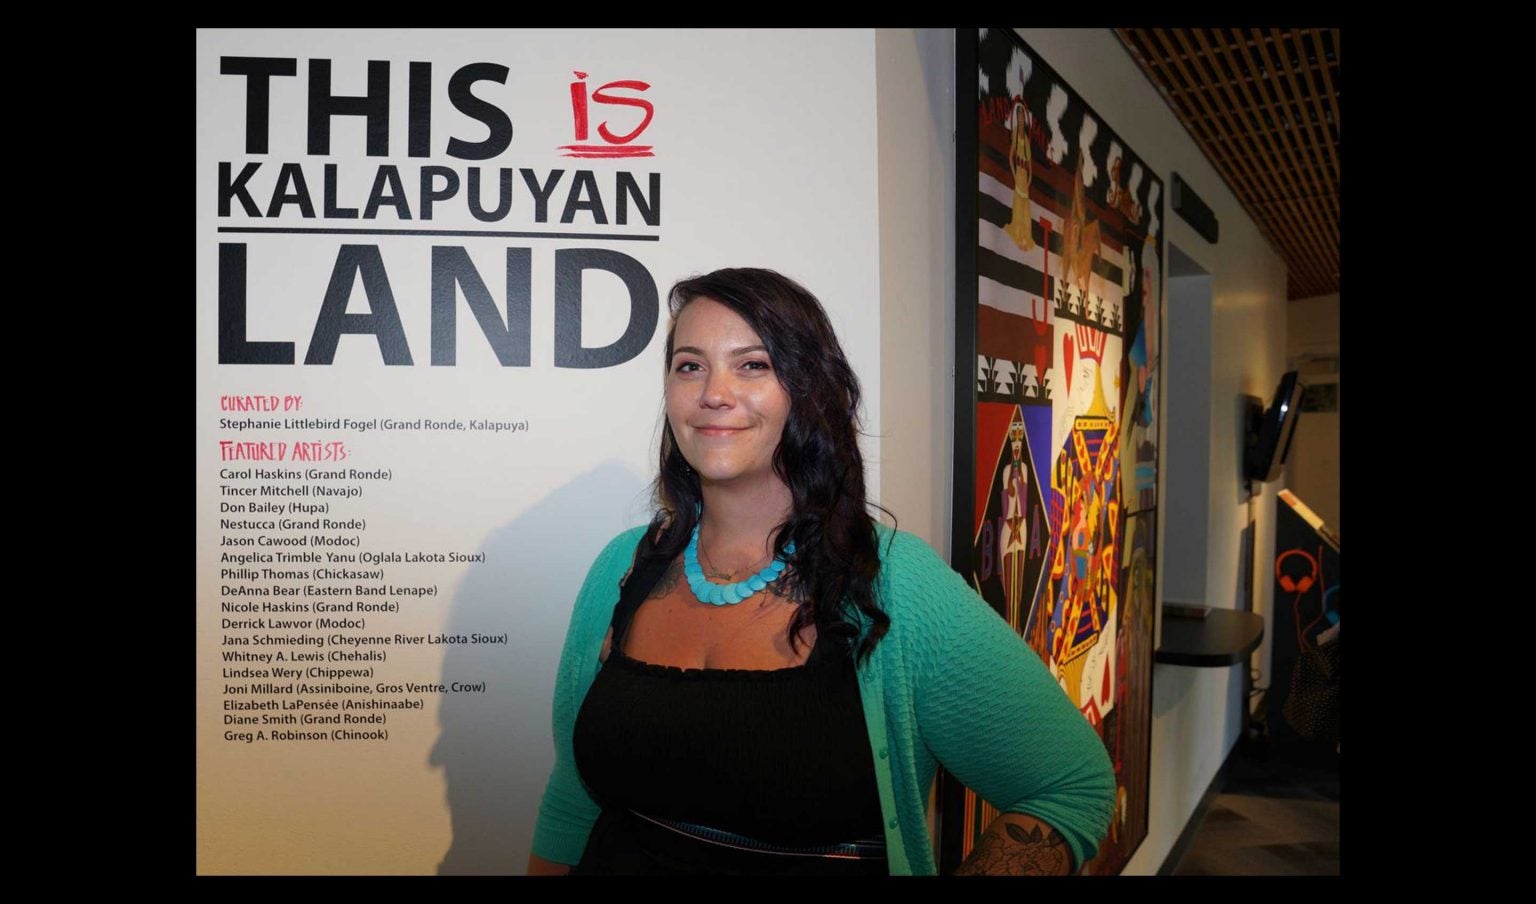 A smiling Steph LIttlebird stands in front of text reading "This is Kalapuyan Land"